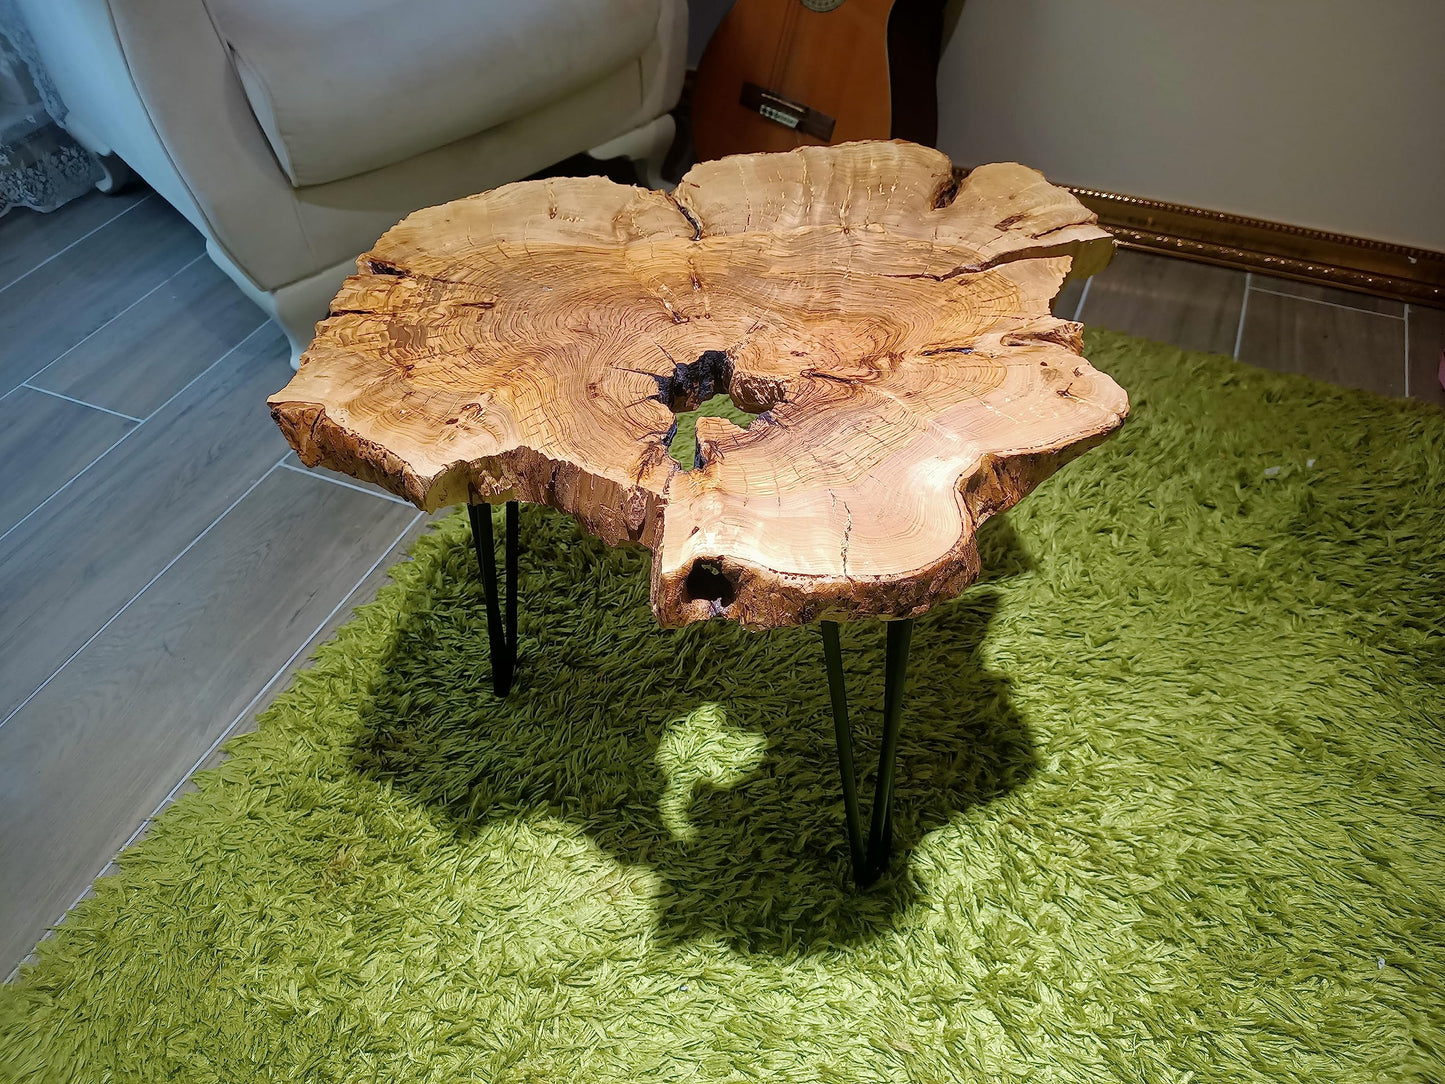 skilled hands Olive Side Table Natural Live Edge end Table 24" Length with Black Legs Rustic Coffee Table Nesting Table l